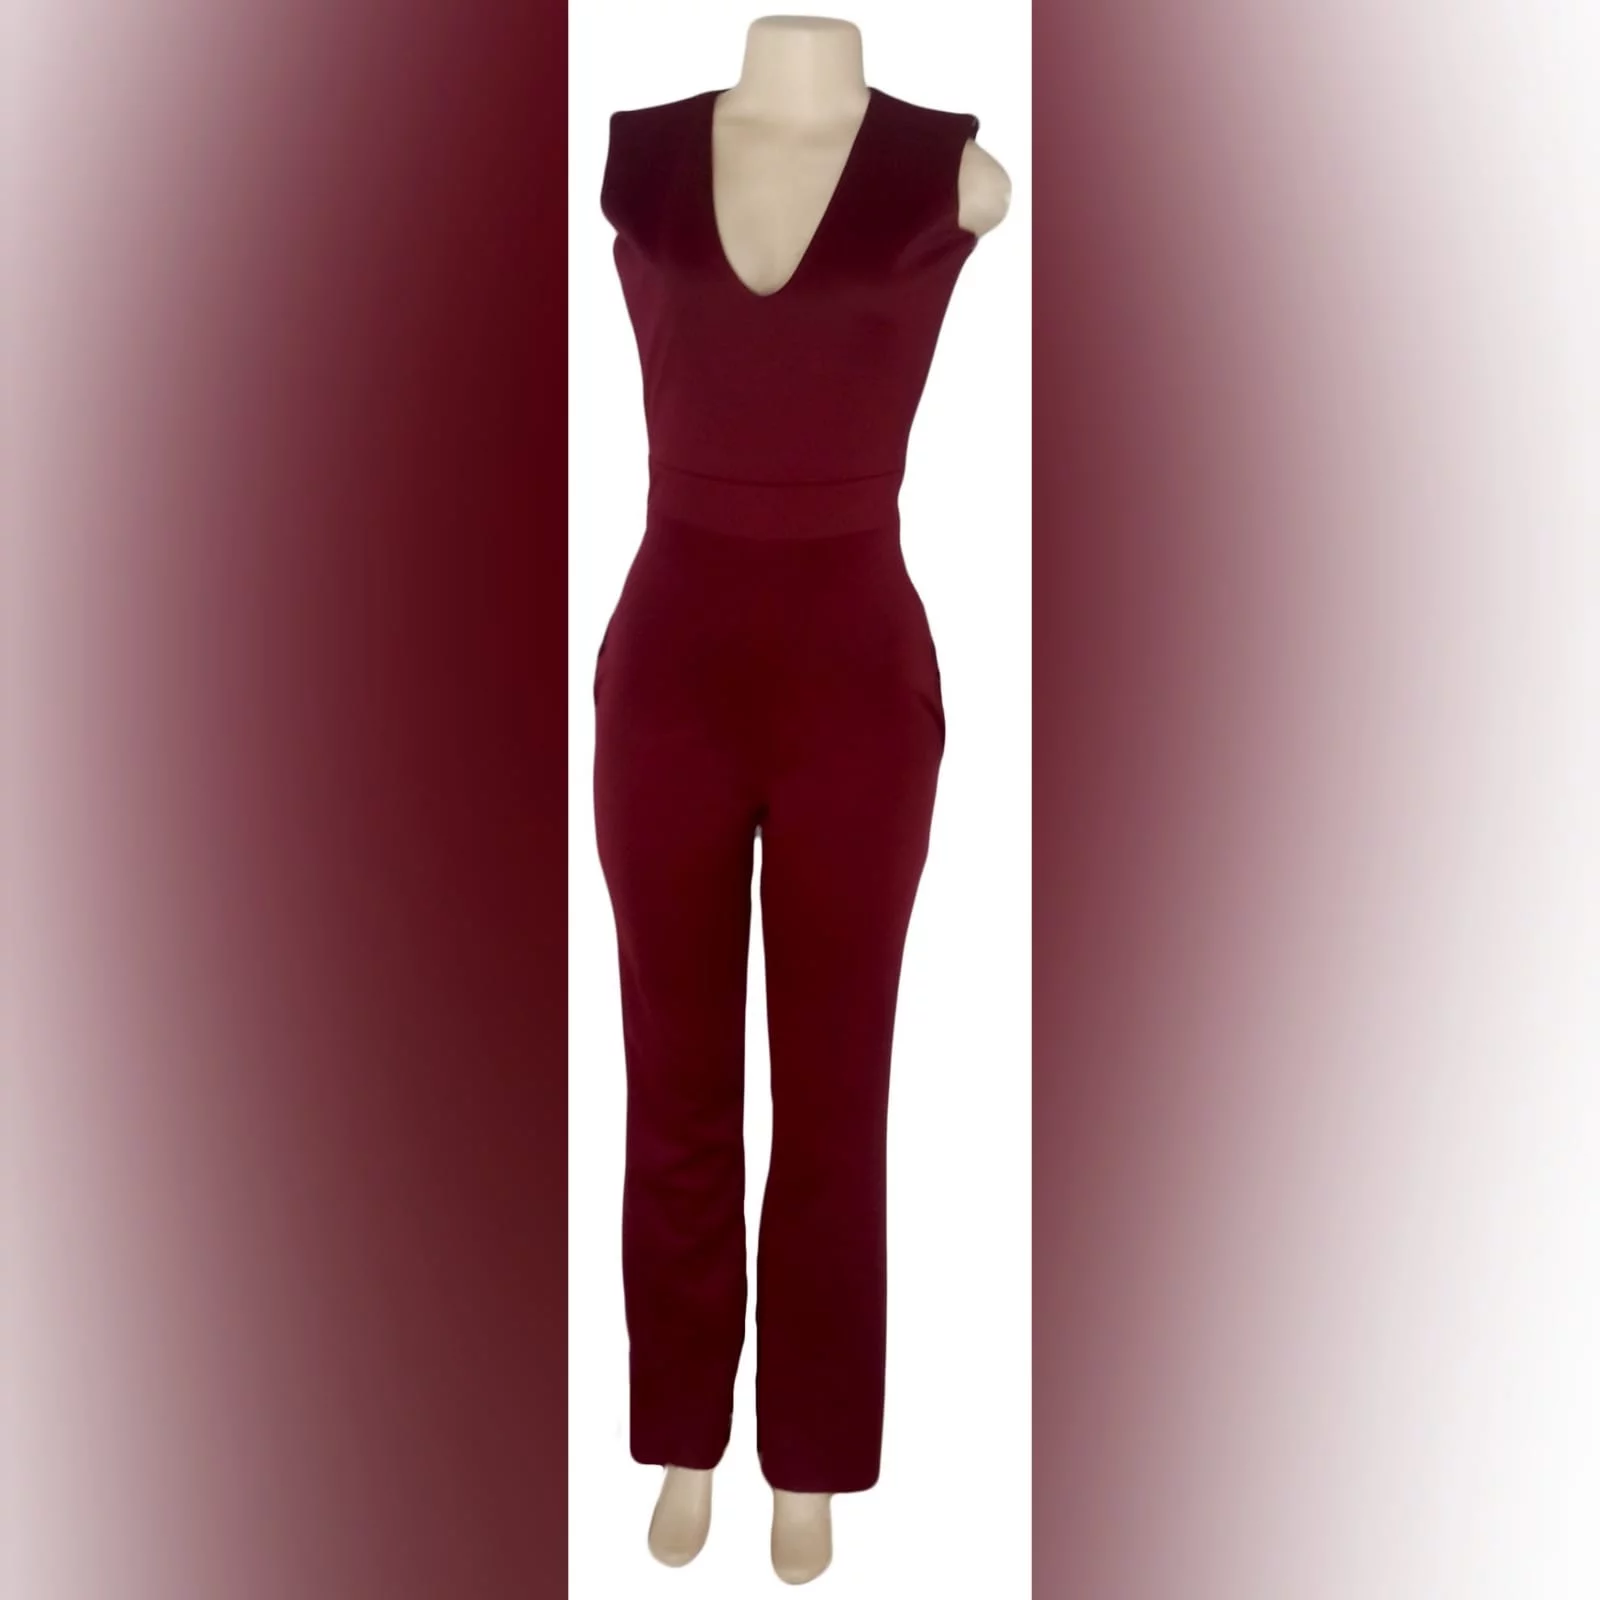 3 piece burgundy evening outfit 3 3 piece burgundy evening outfit. Bodysuit with a v neckline, with a removable peplum belt. With a removable shoulder cape